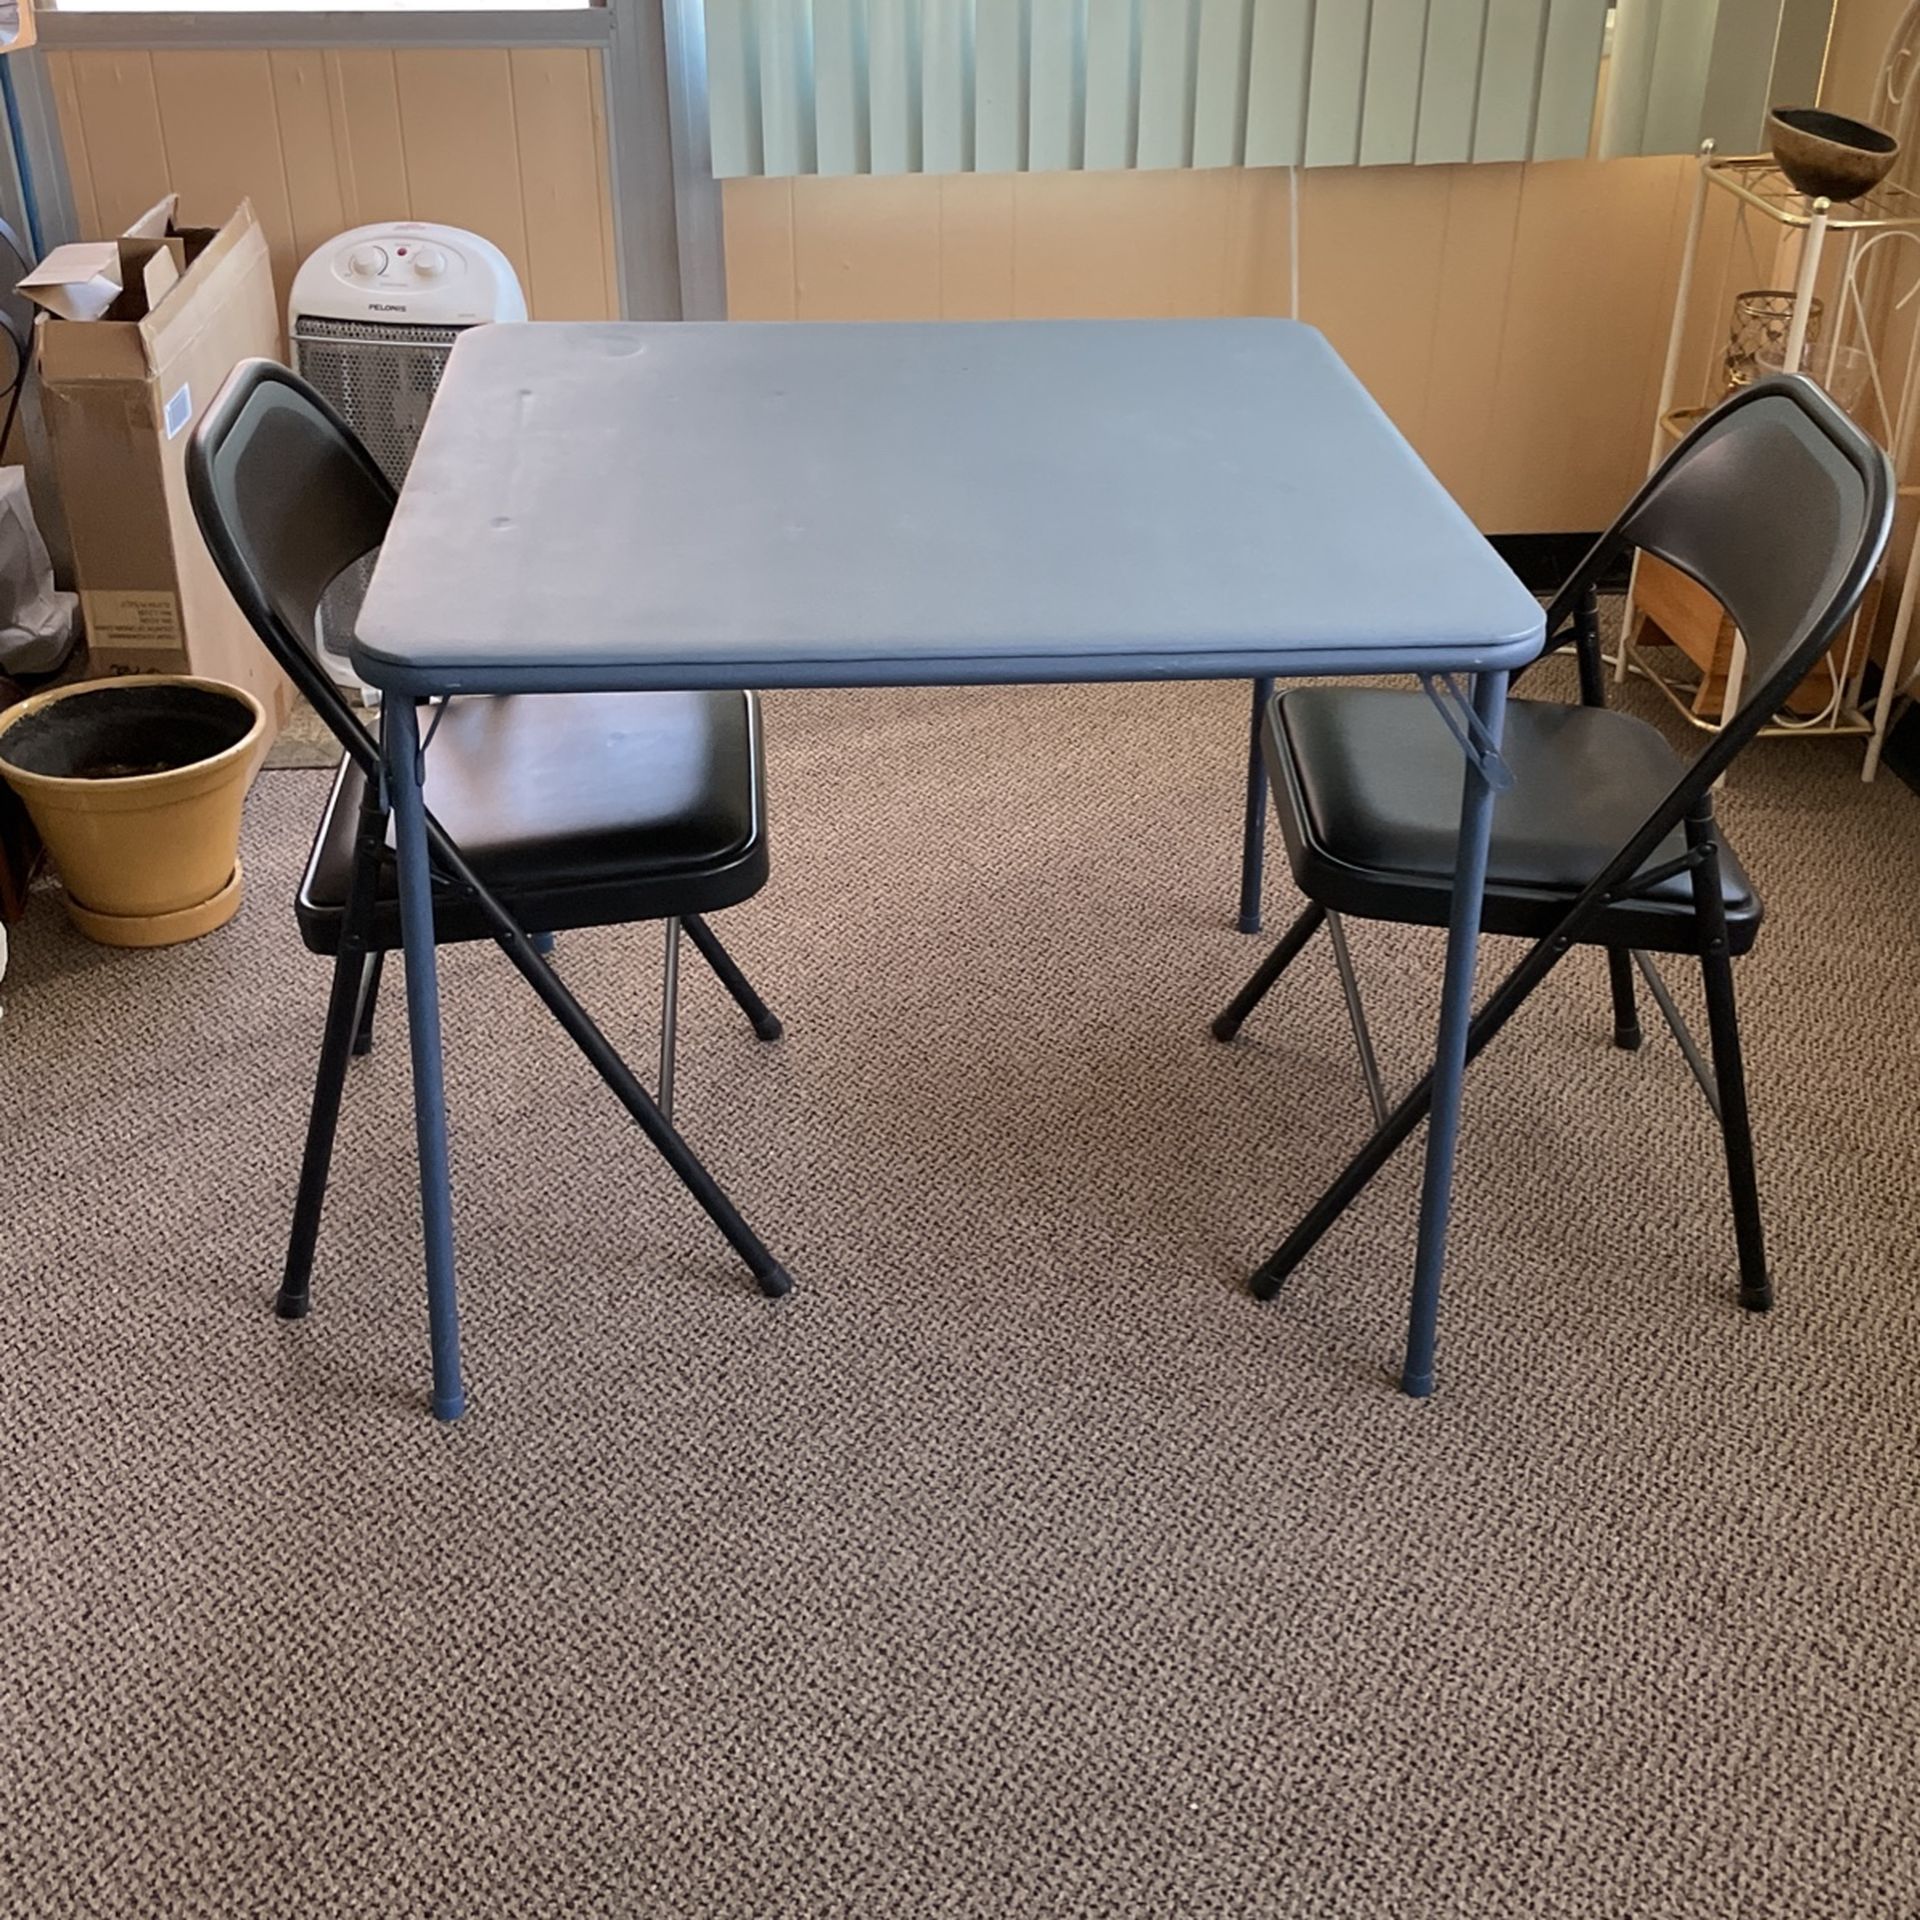 Foldable Table And Chairs